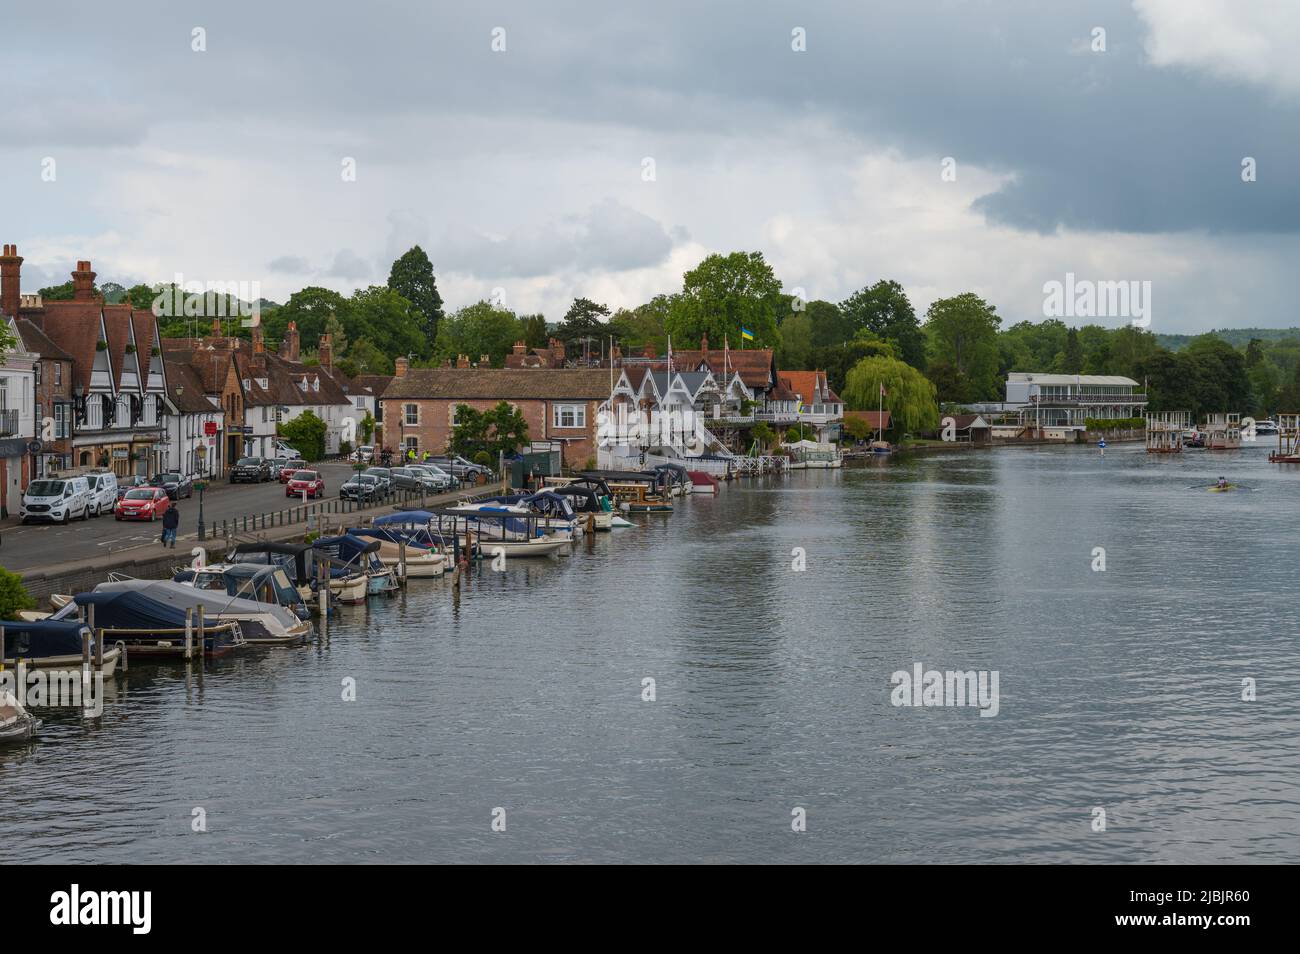 View along the River Thames from Henley Bridge. Rowers on the water in double scull. Henley on Thames, Oxfordshire, England, UK Stock Photo